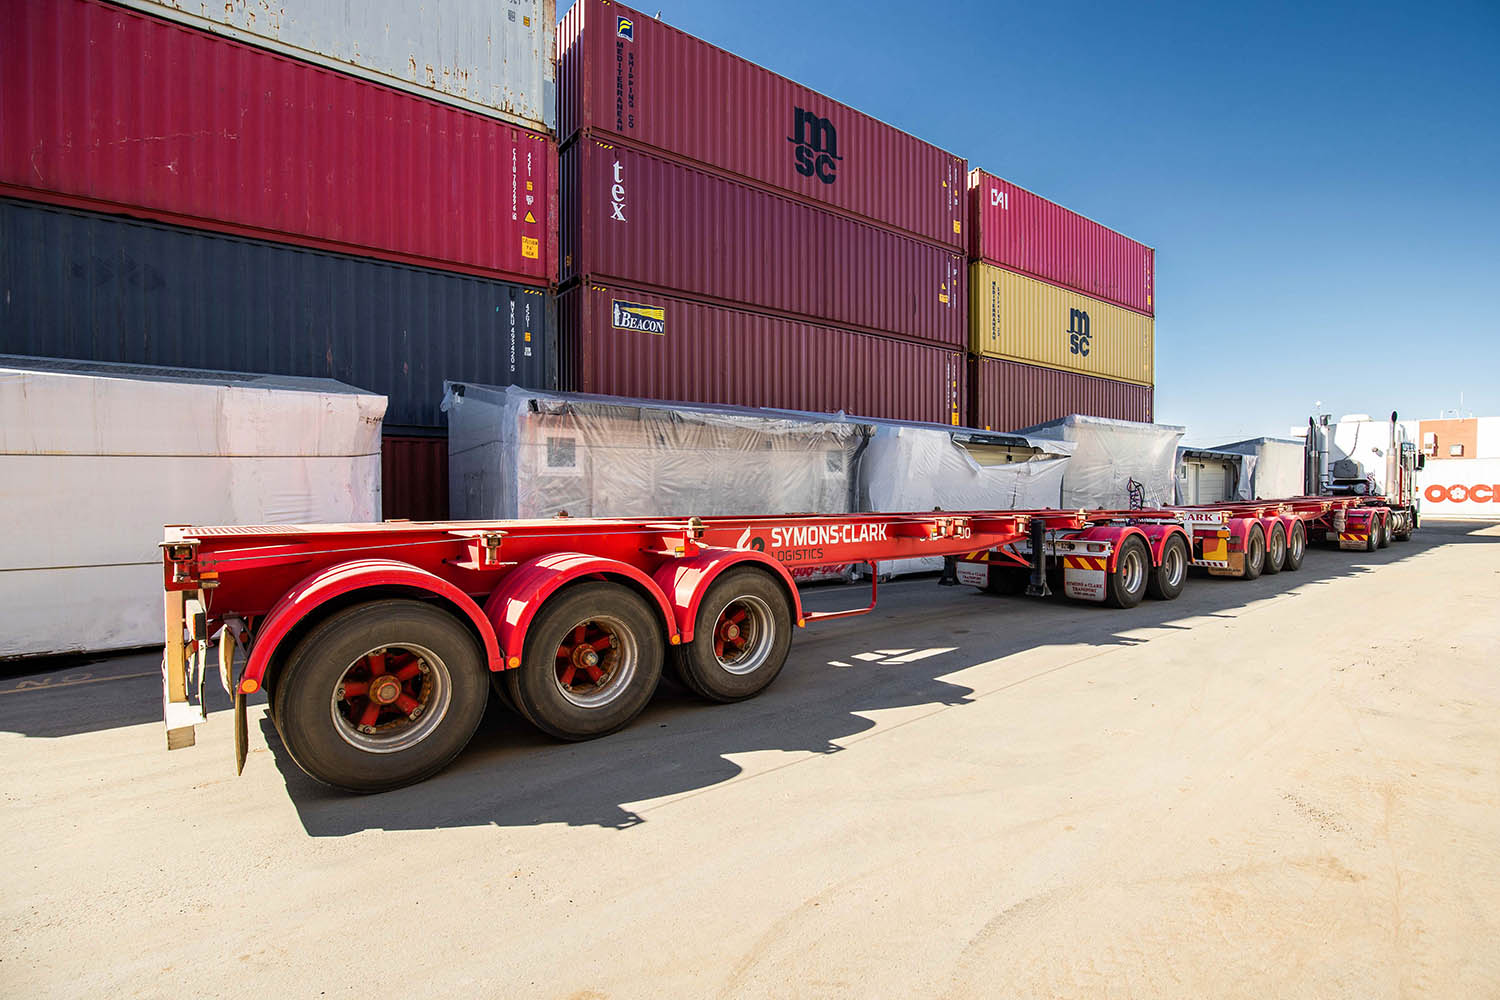 Skel Trailers from Freighter for Symons Clark Logistics